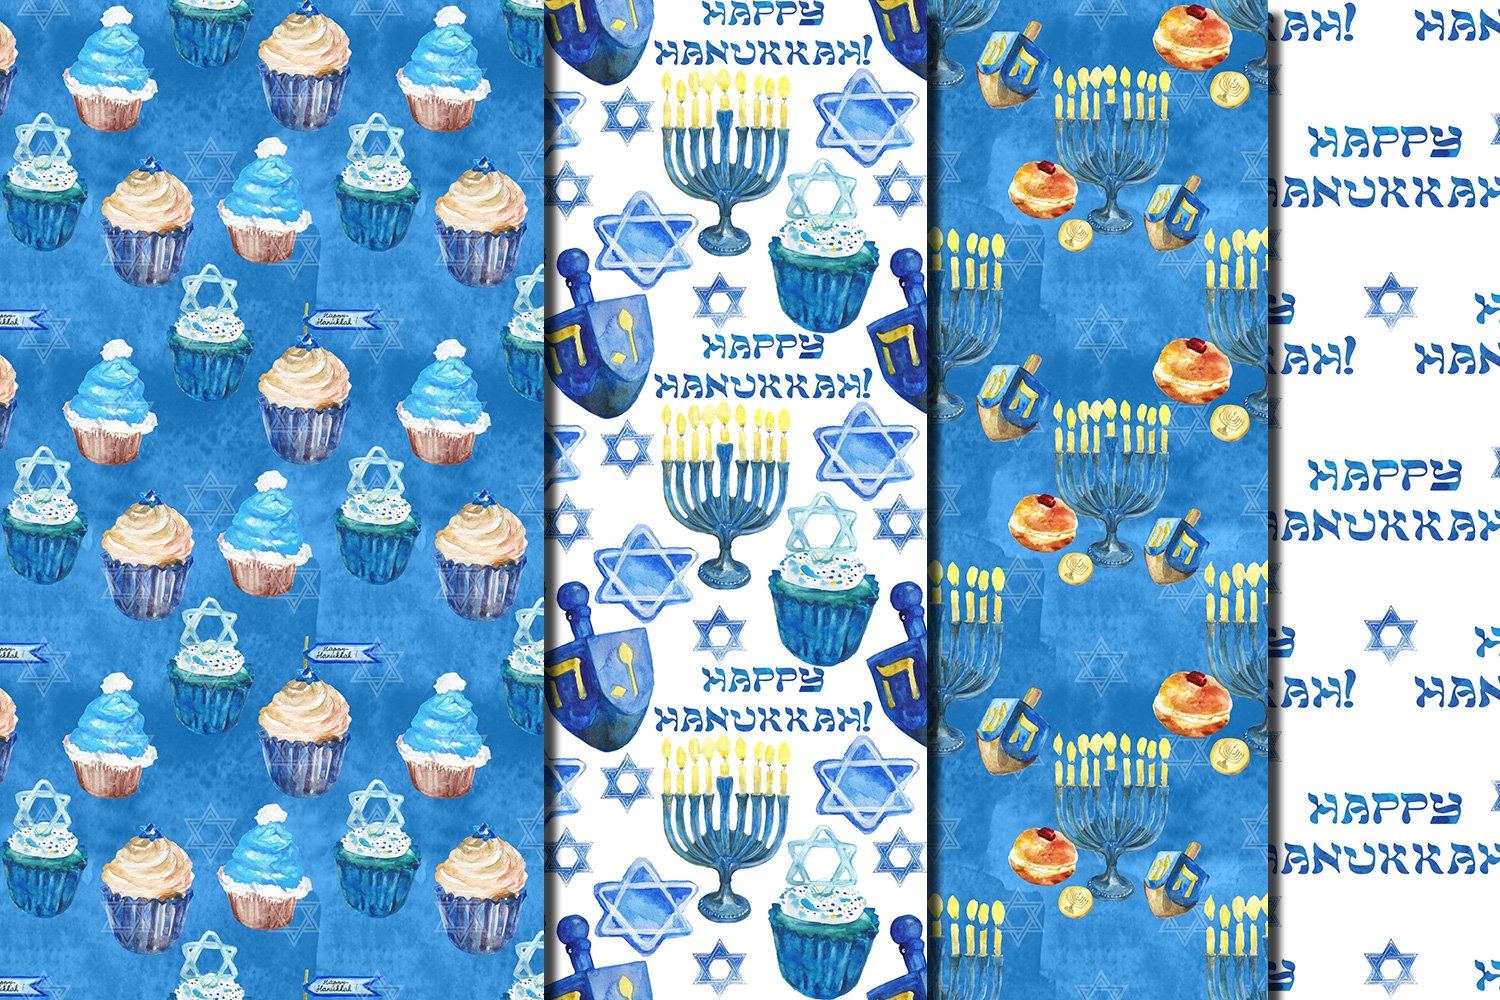 Beautiful images of blue-toned baked goods and other Hanukkah treats.